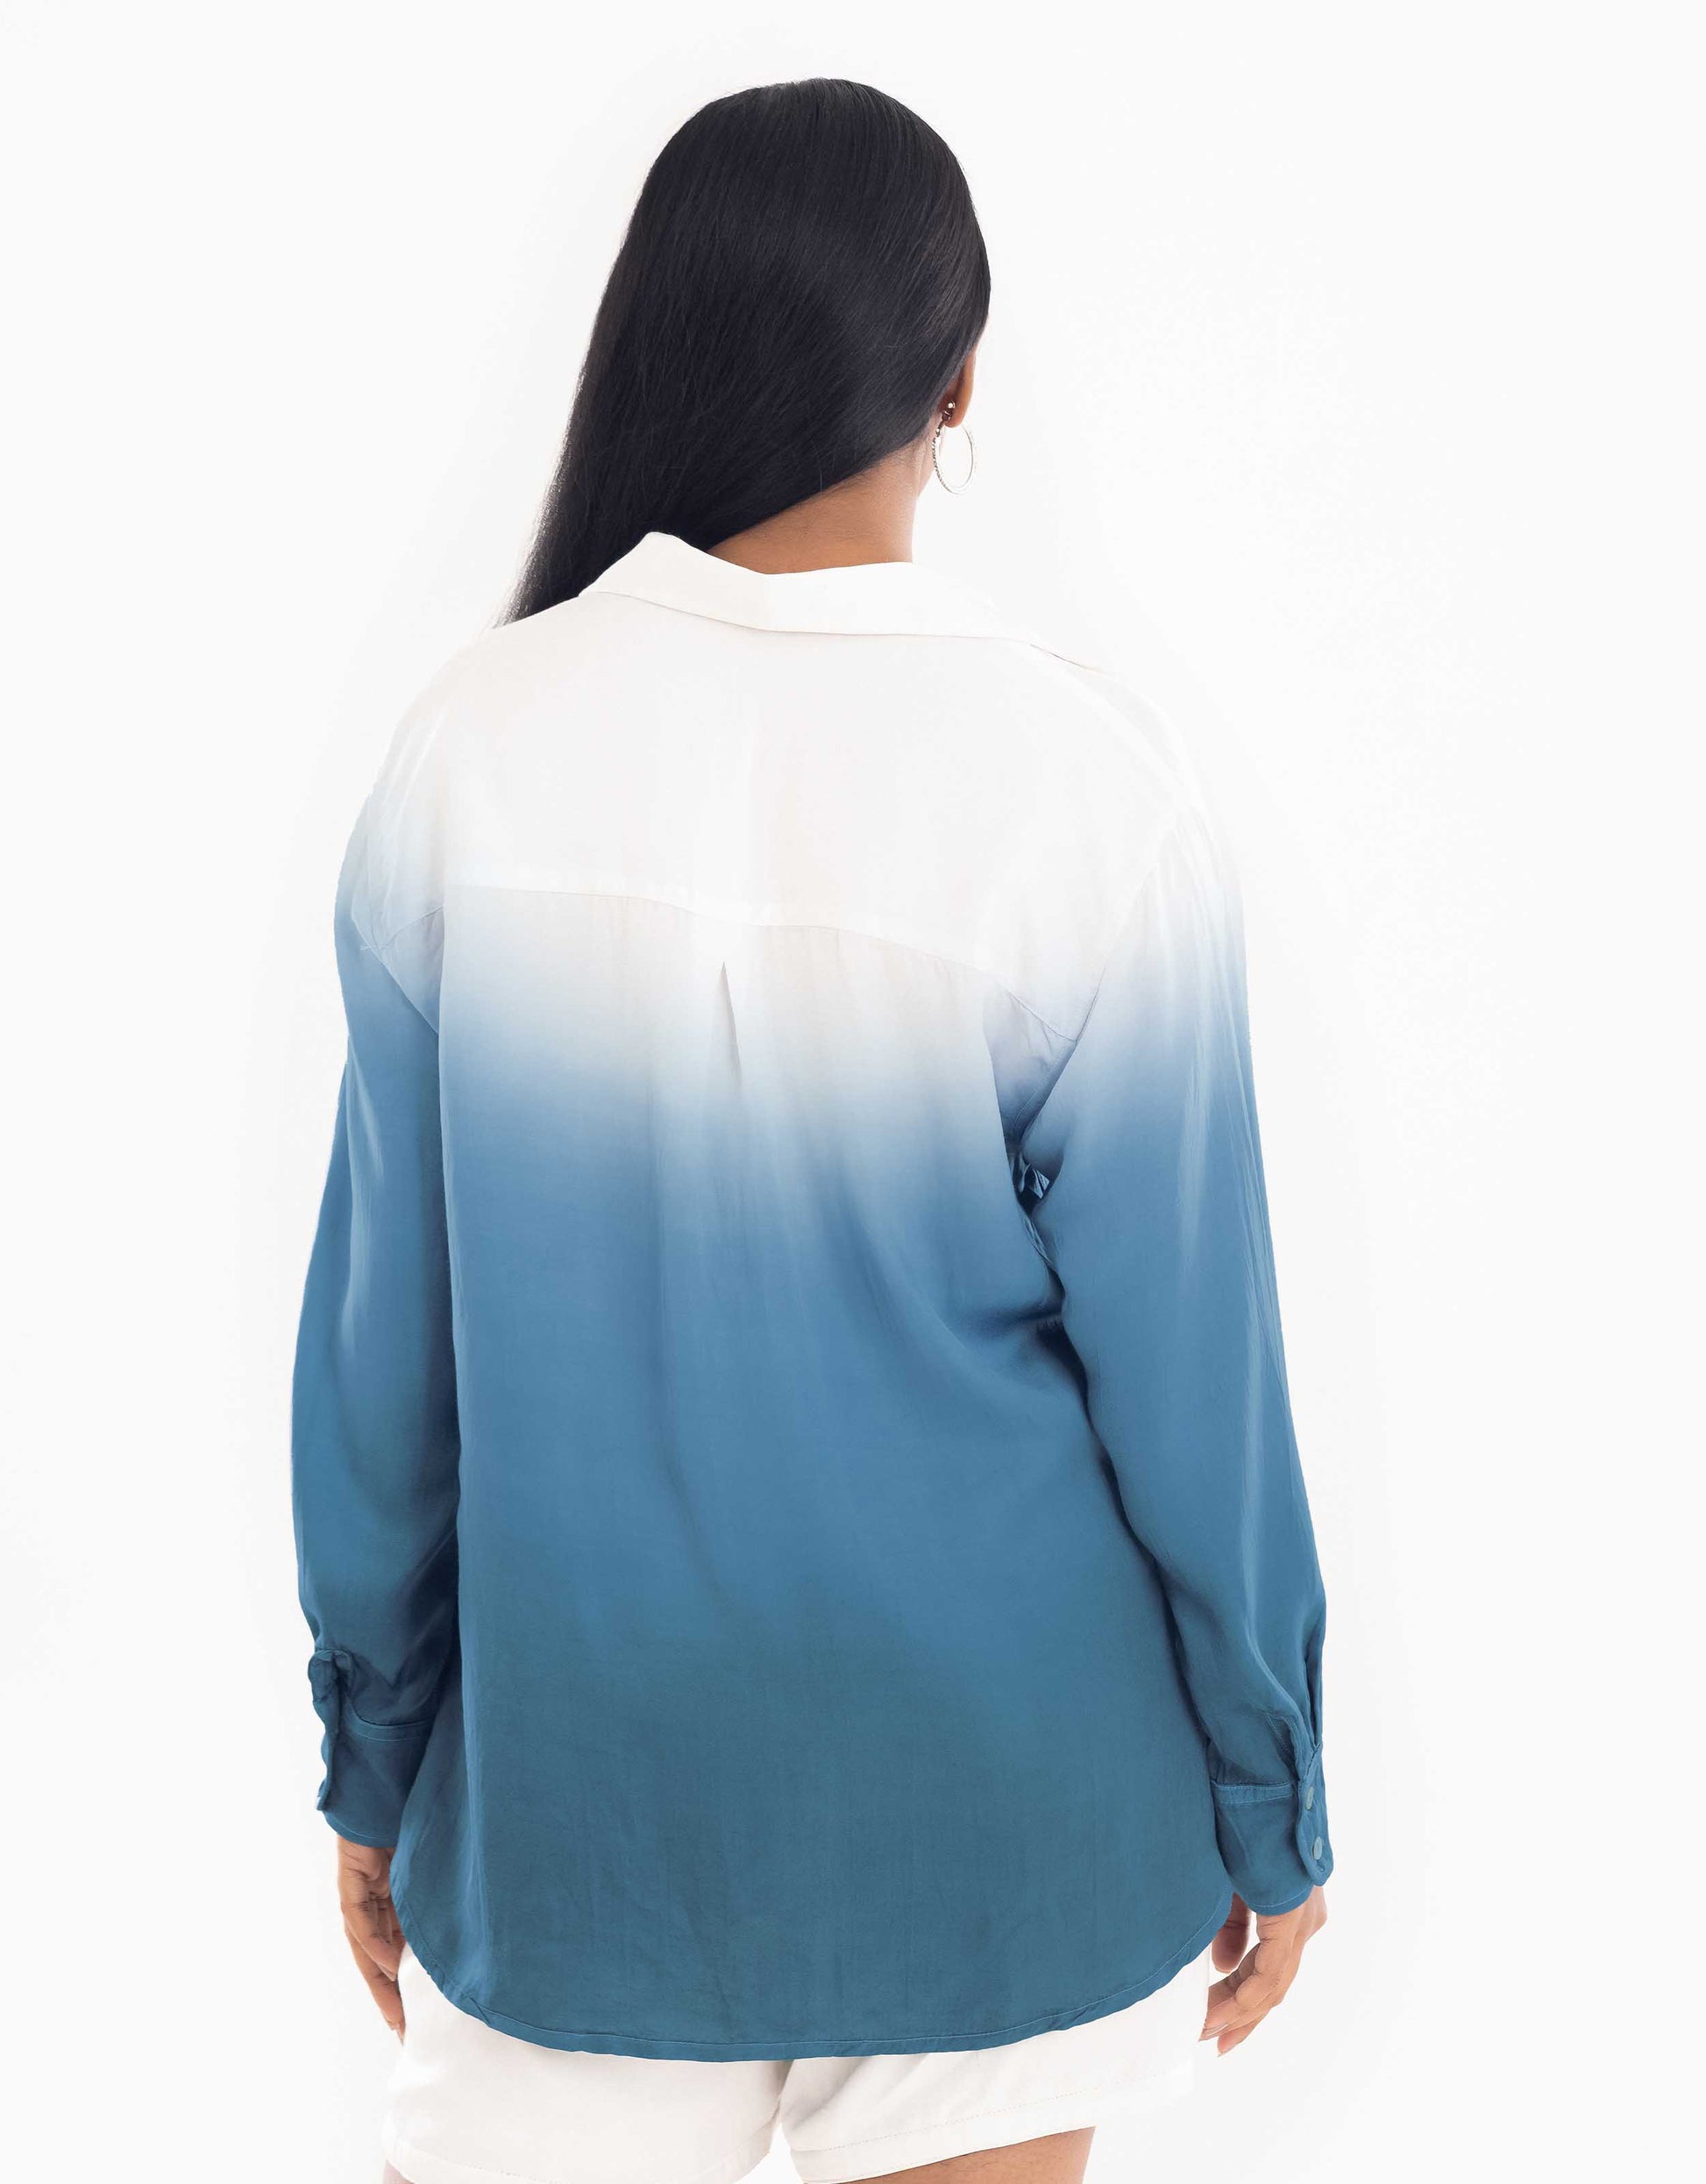 Hueloom teal ombre oversized shirt back view display.